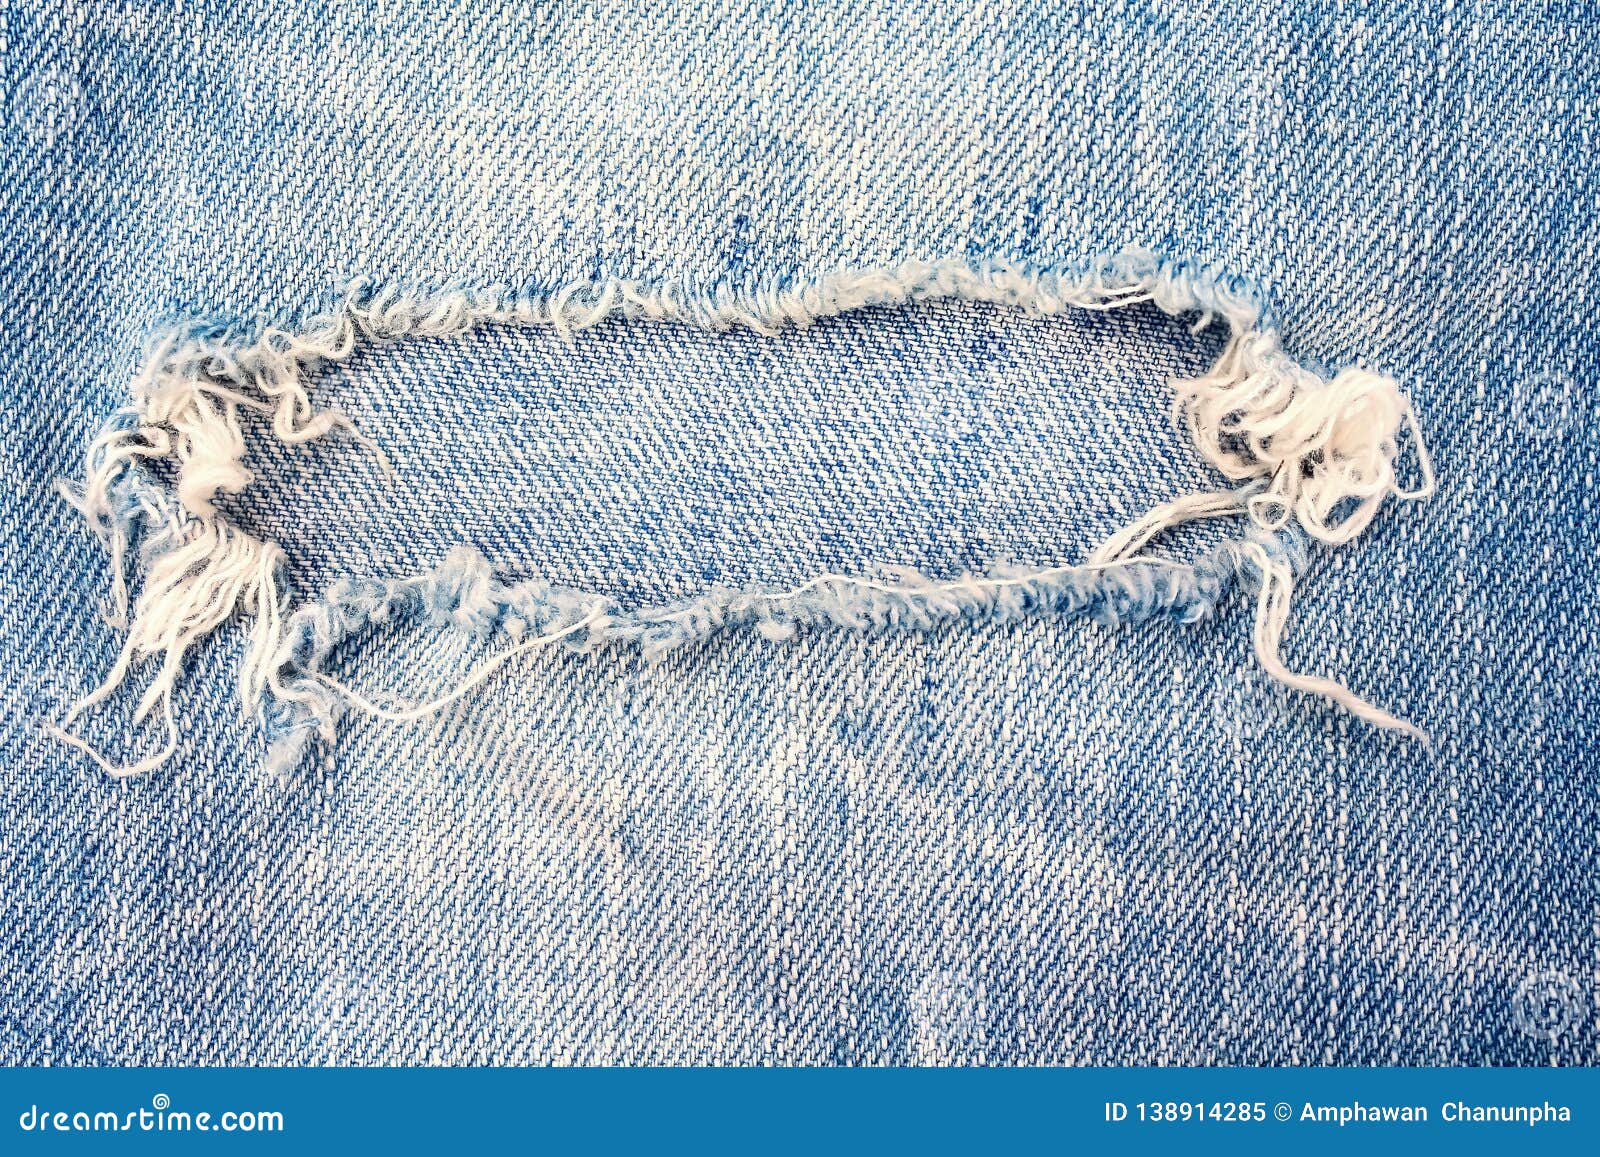 Blue Denim Jeans with Ripped Patterns Texture for Background Stock ...